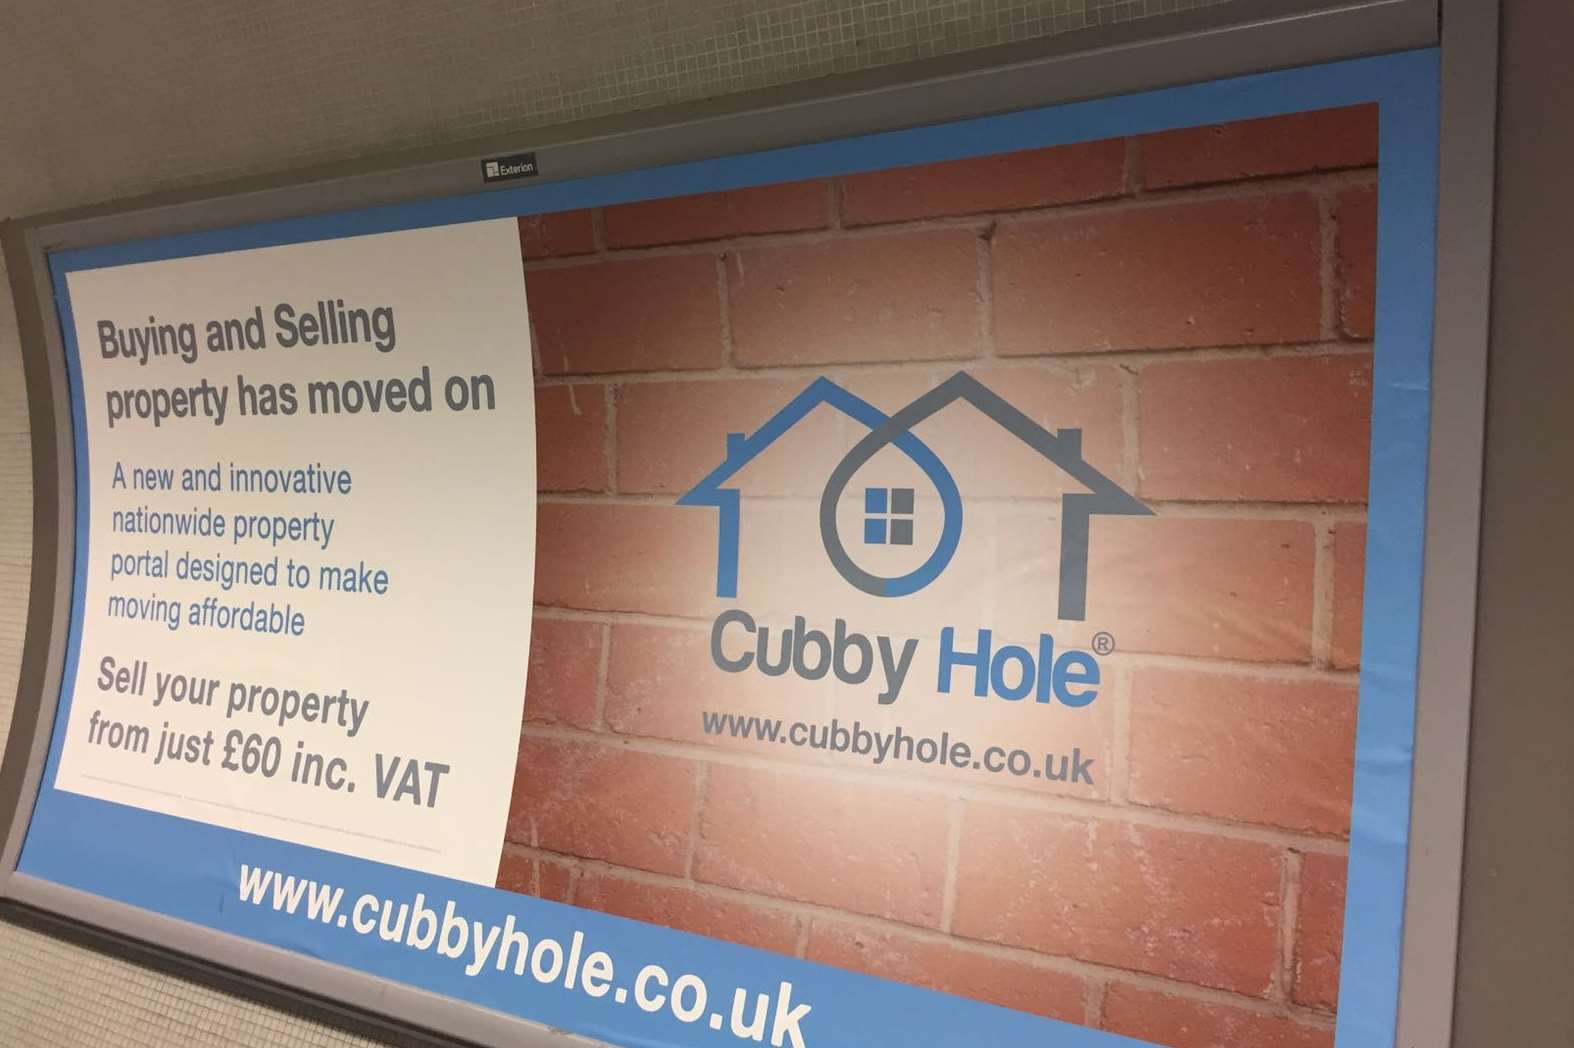 Market your home for just £1 with CubbyHole